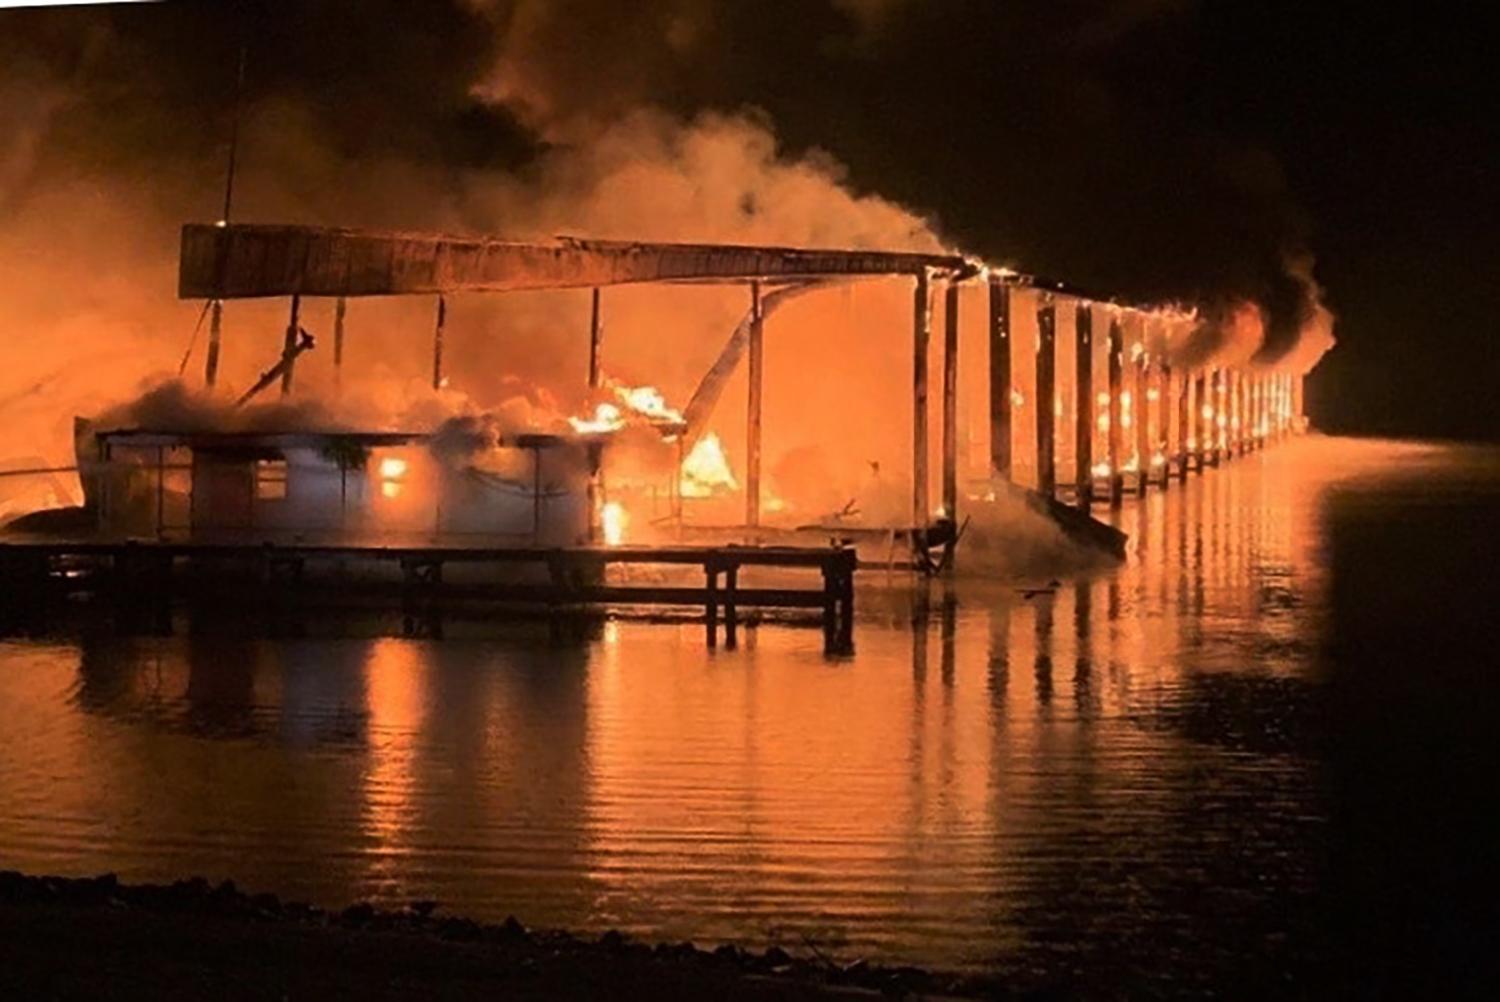 A blaze that broke out at the Jackson County Marina in Alabama is responsible for several deaths, according to officials.